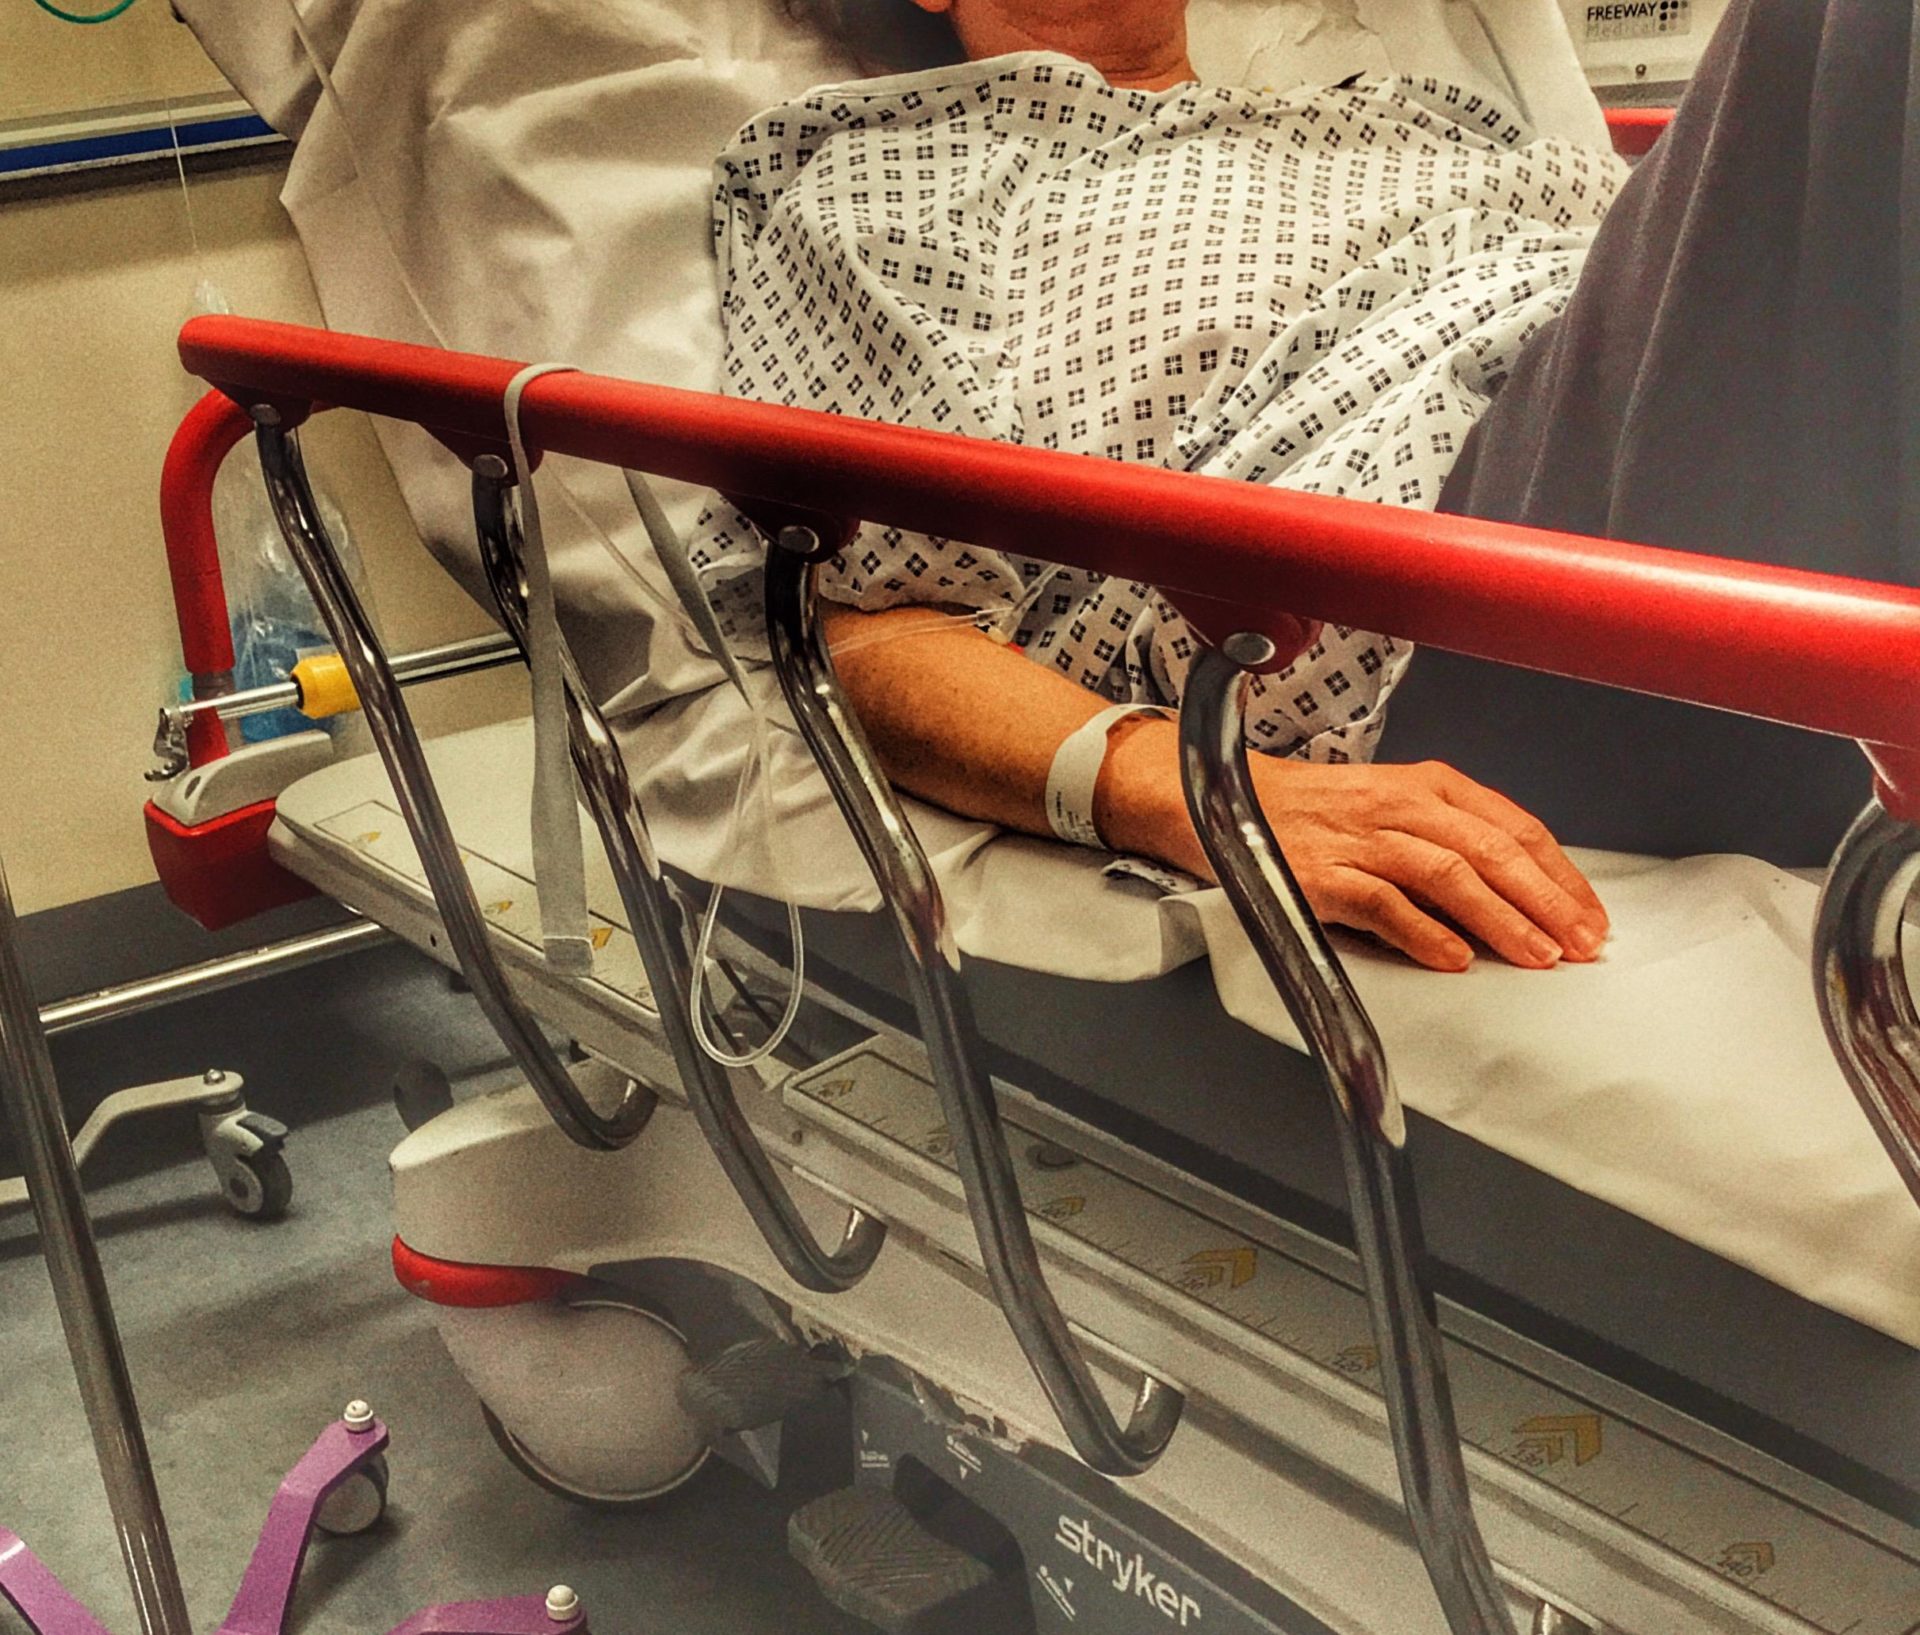 File photo shows a patient on a trolley in a hospital A&E.